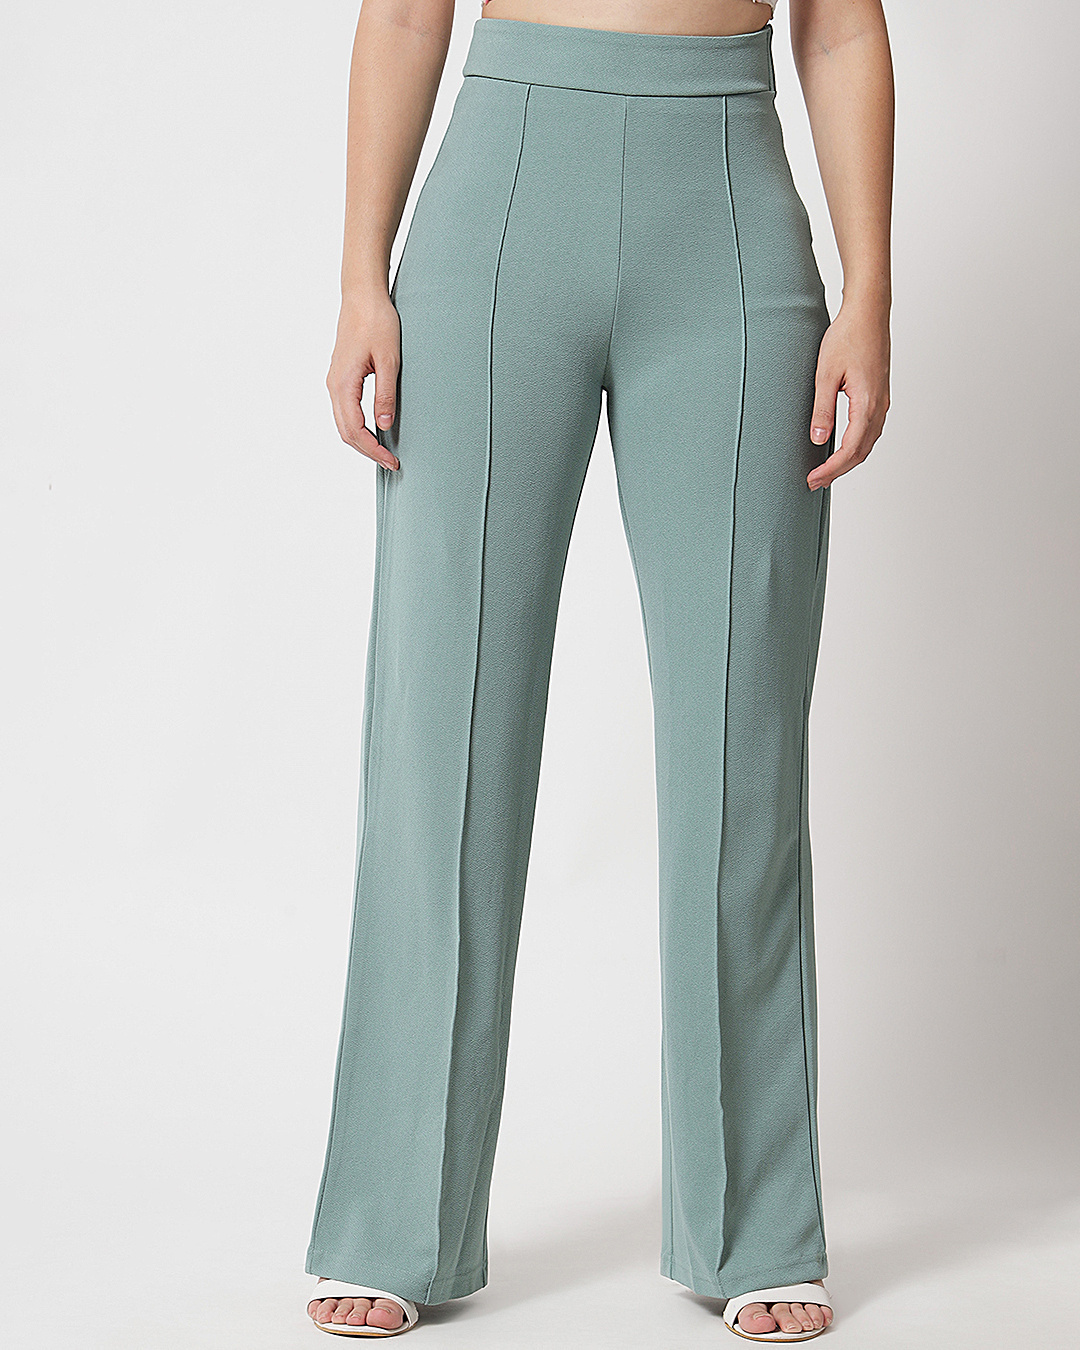 Crease Resistant Flat Front Trousers